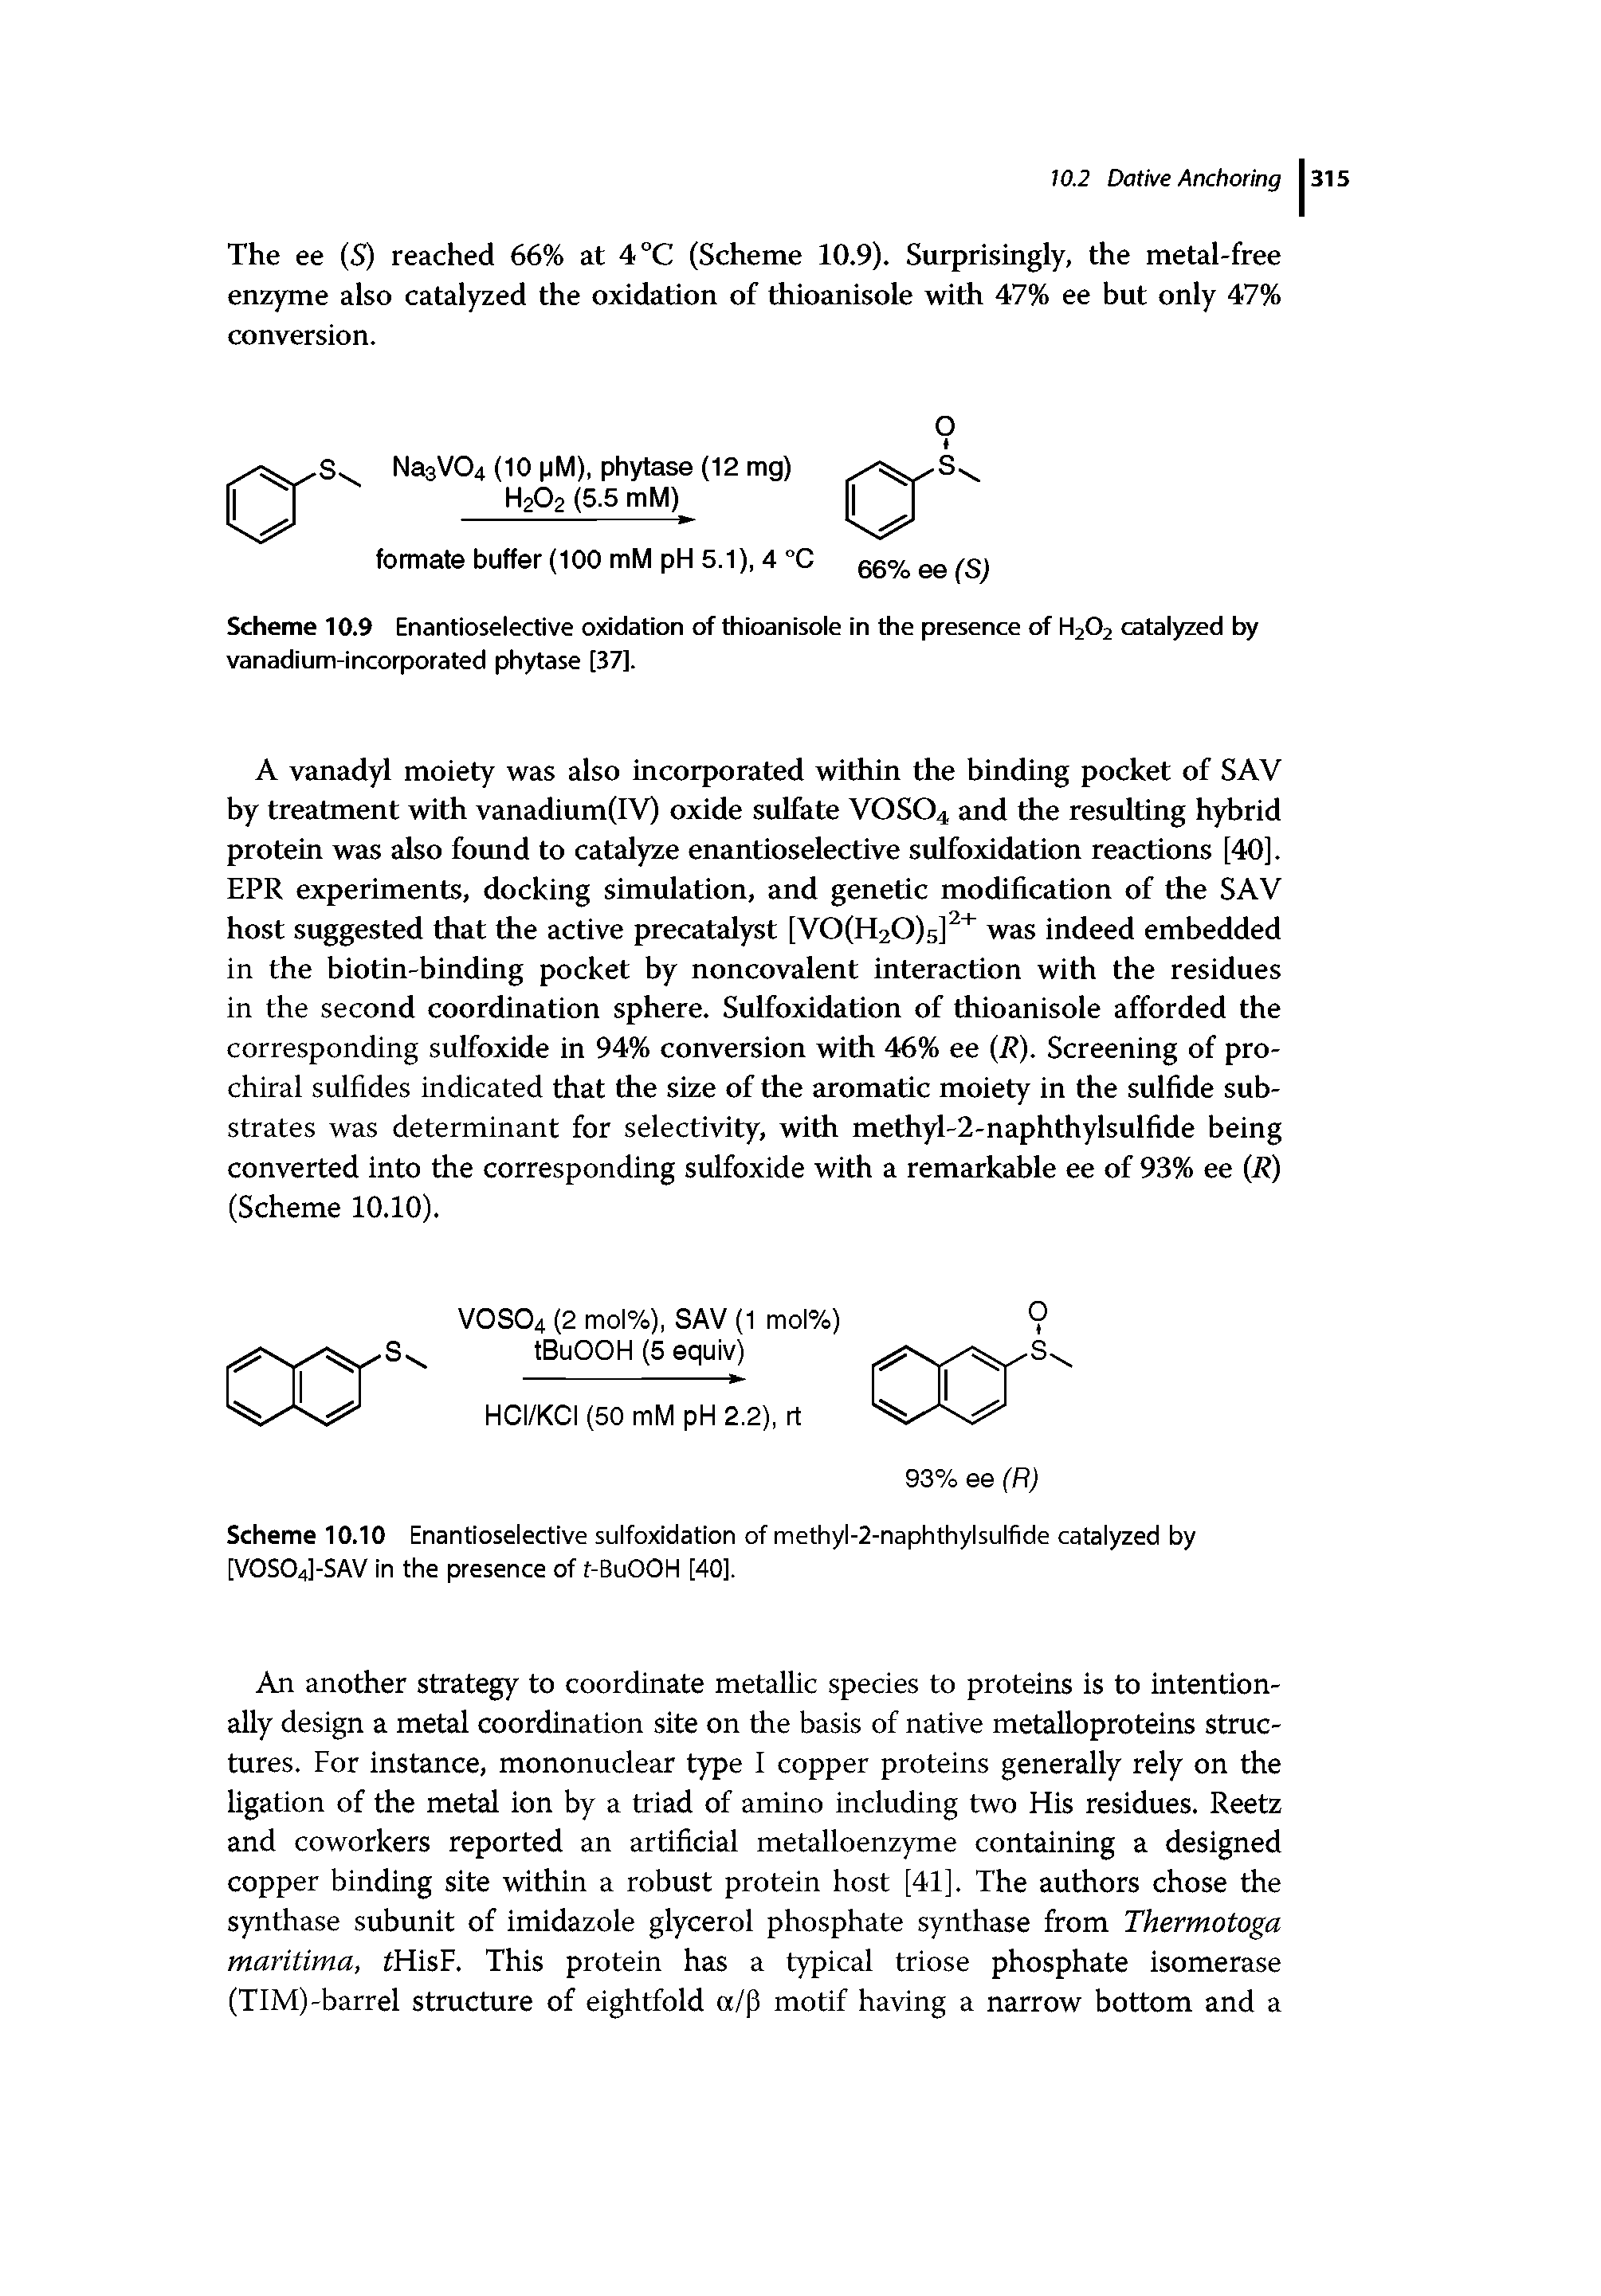 Scheme 10.9 Enantioselective oxidation of thioanisole in the presence of H2O2 catalyzed by vanadium-incorporated phytase [37].